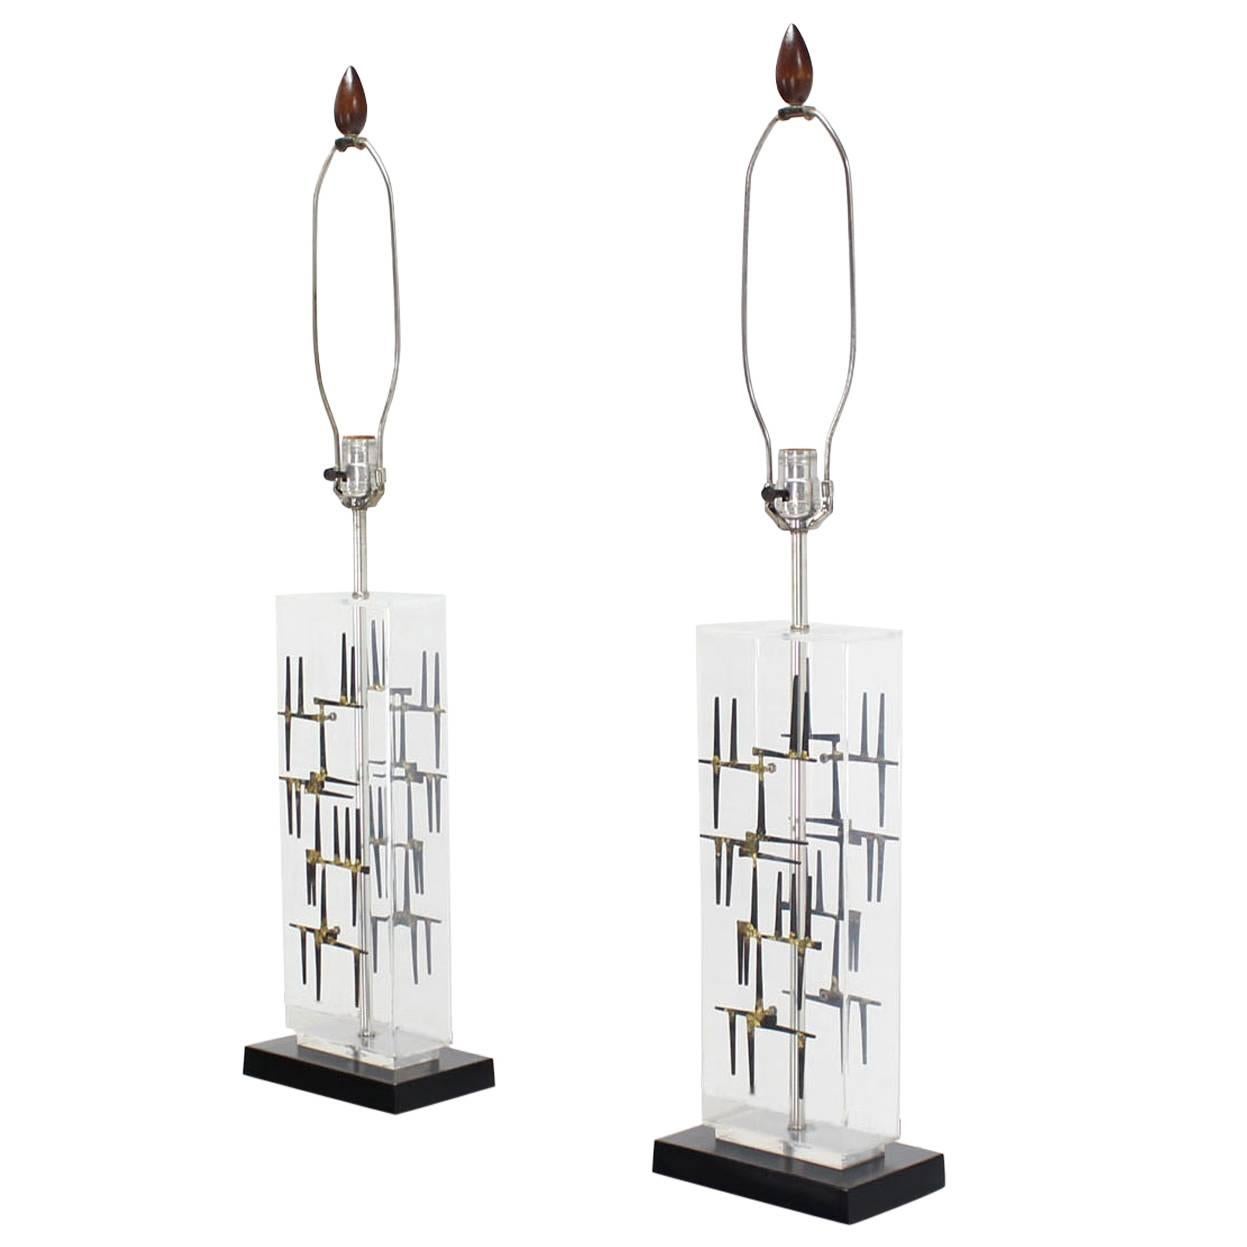 Pair of Sculptural Welded Spikes Table Lamp Attributed to William Bowie